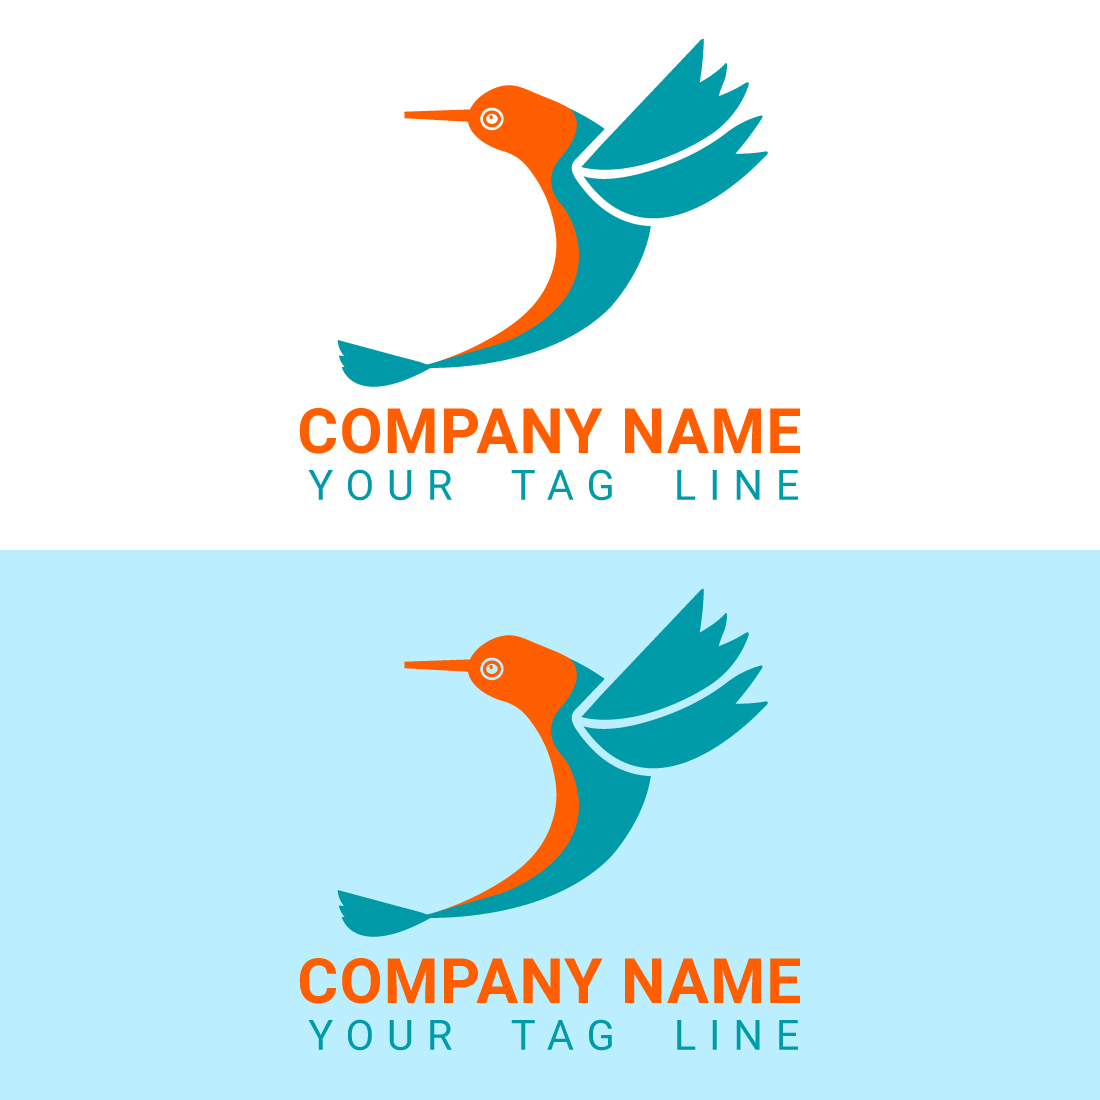 Bird colorful logo gradient vector cover image.